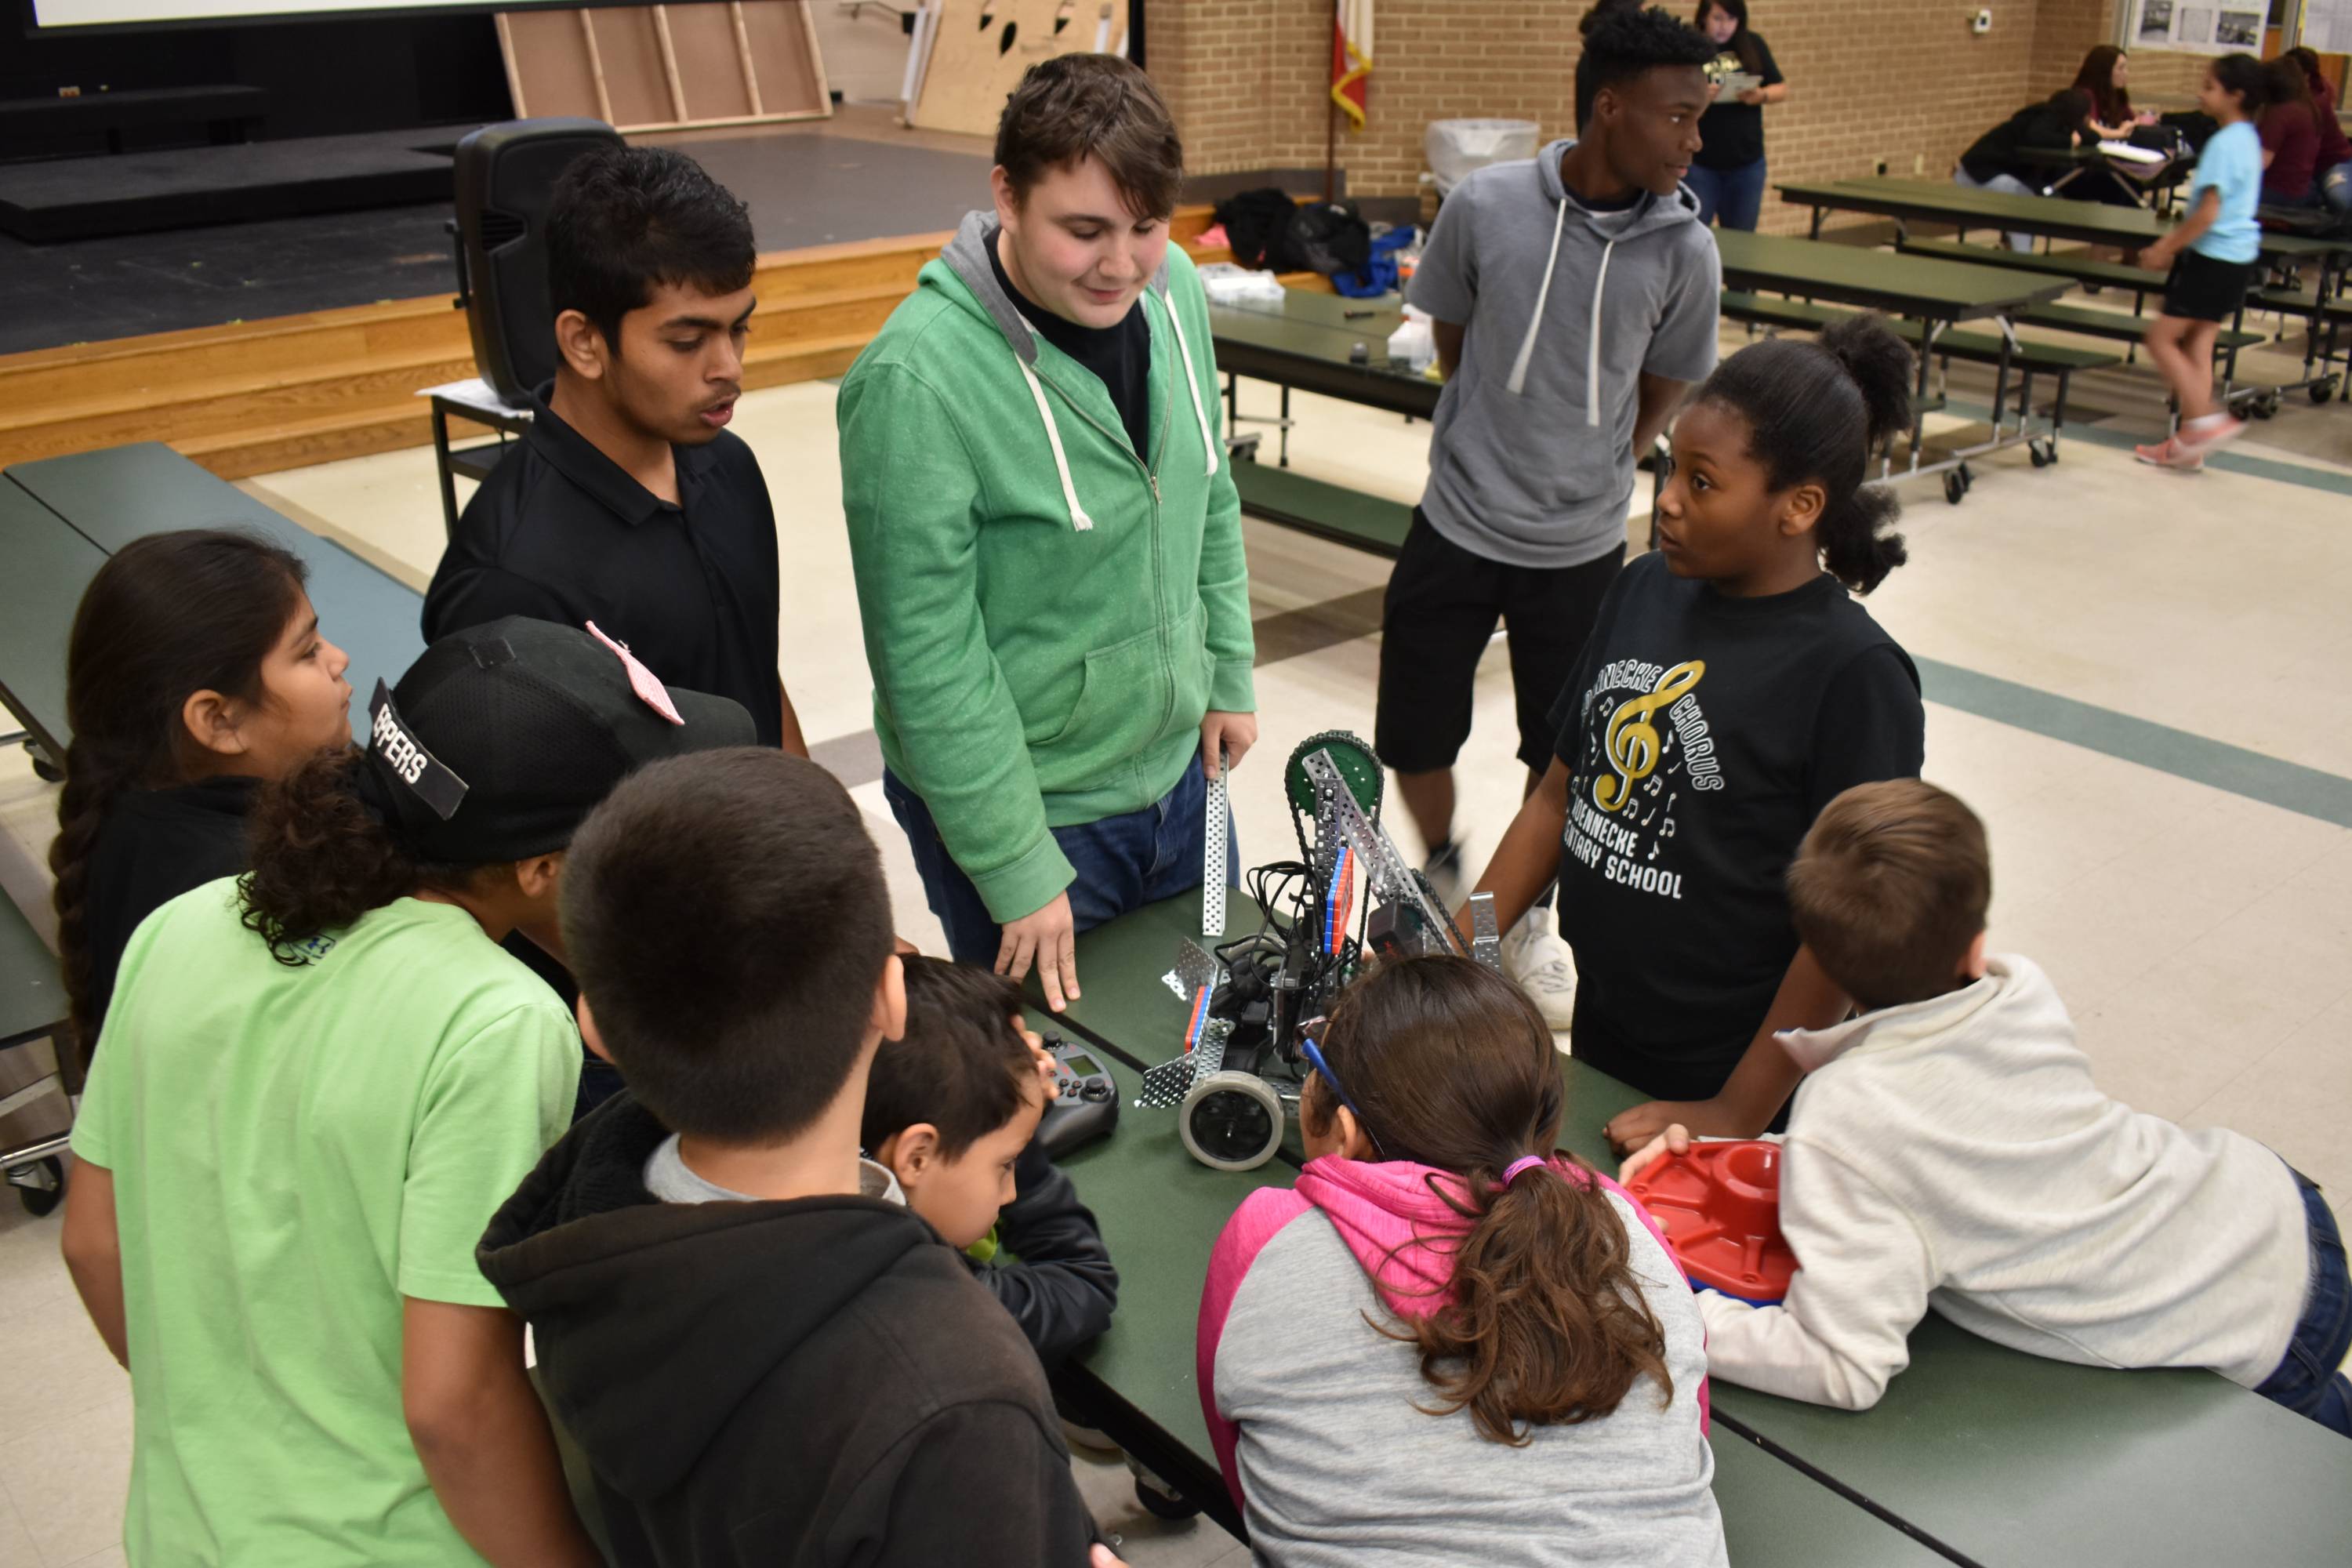 high school students show a group of younger students a robot that is positioned on a table in the middle of the group